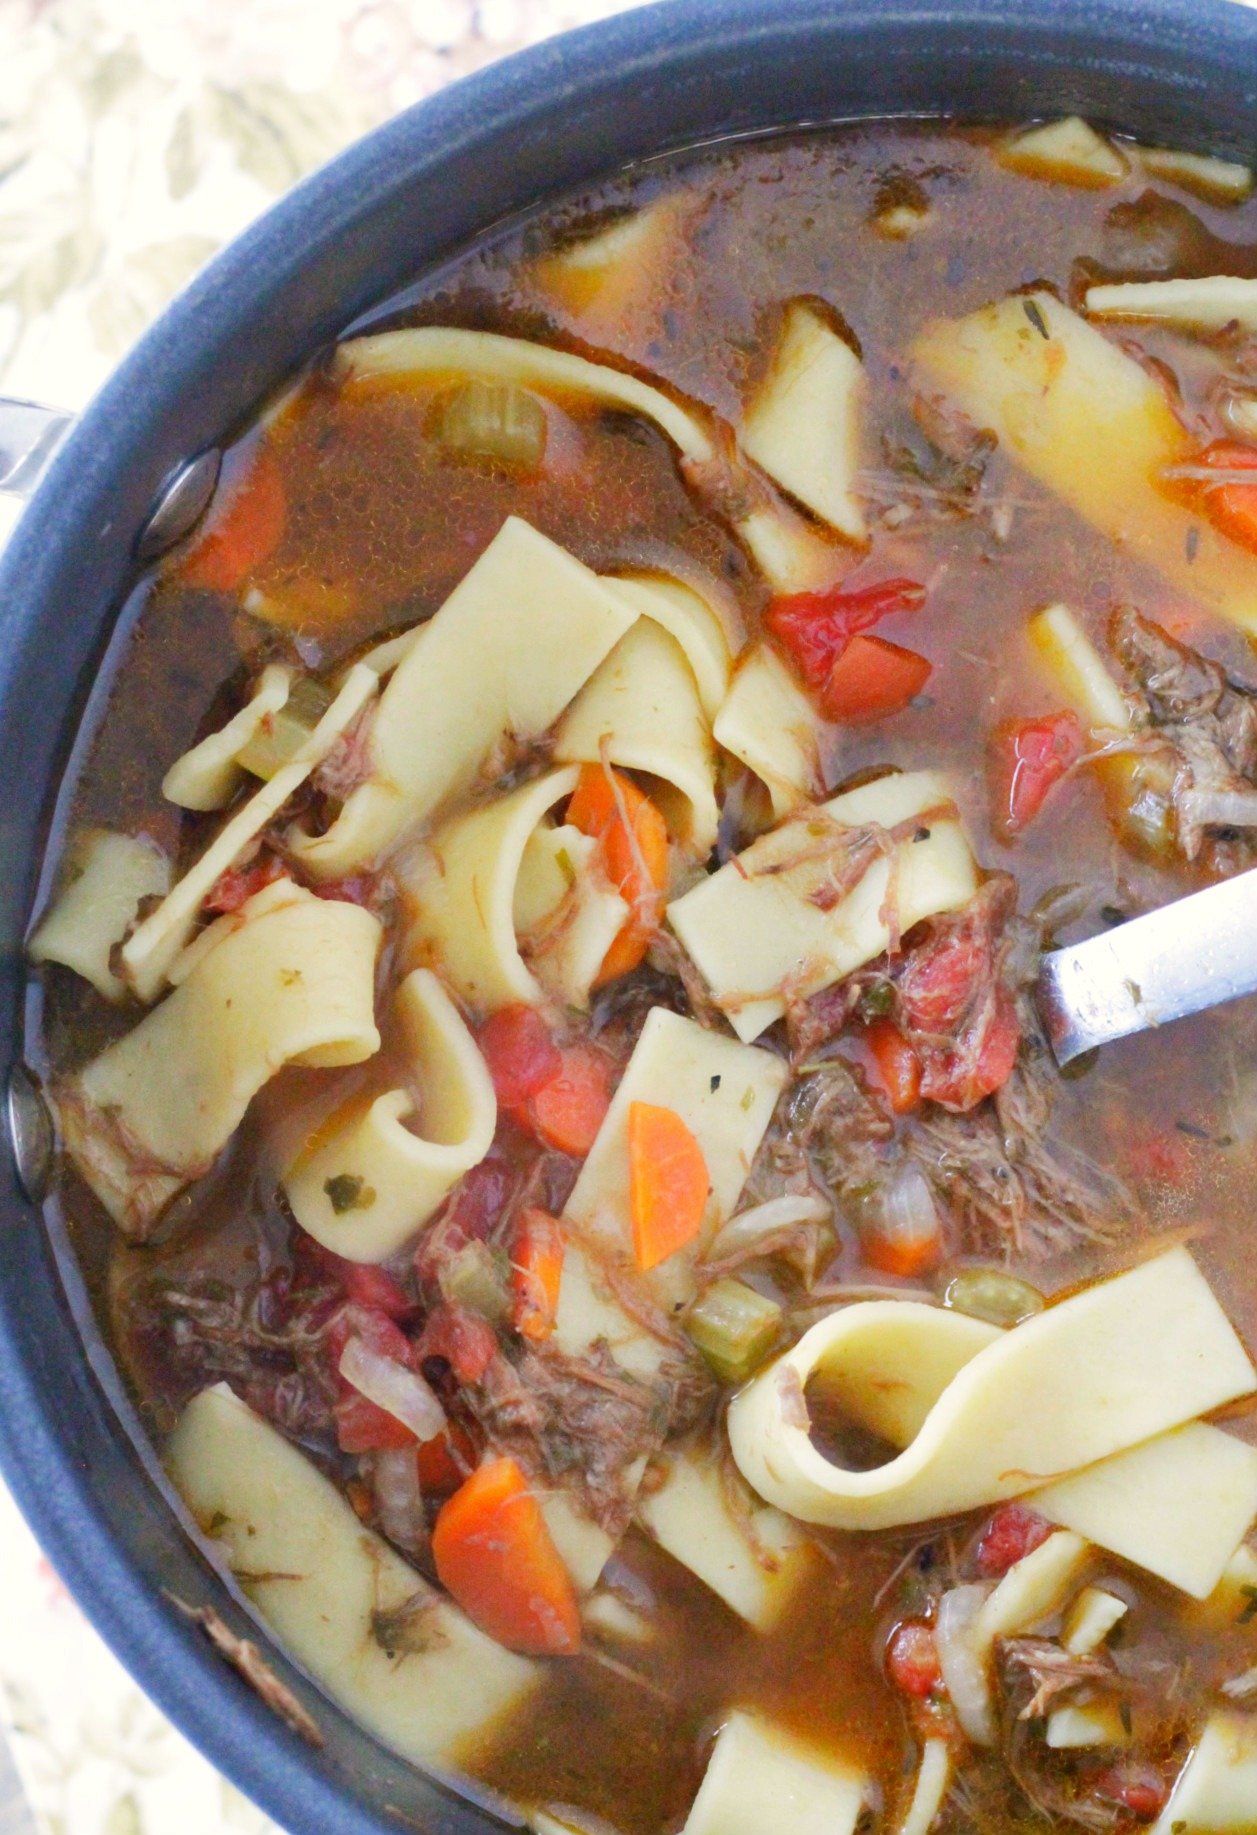 Steps to Prepare Beef Stew Leftover Roast Beef Recipes